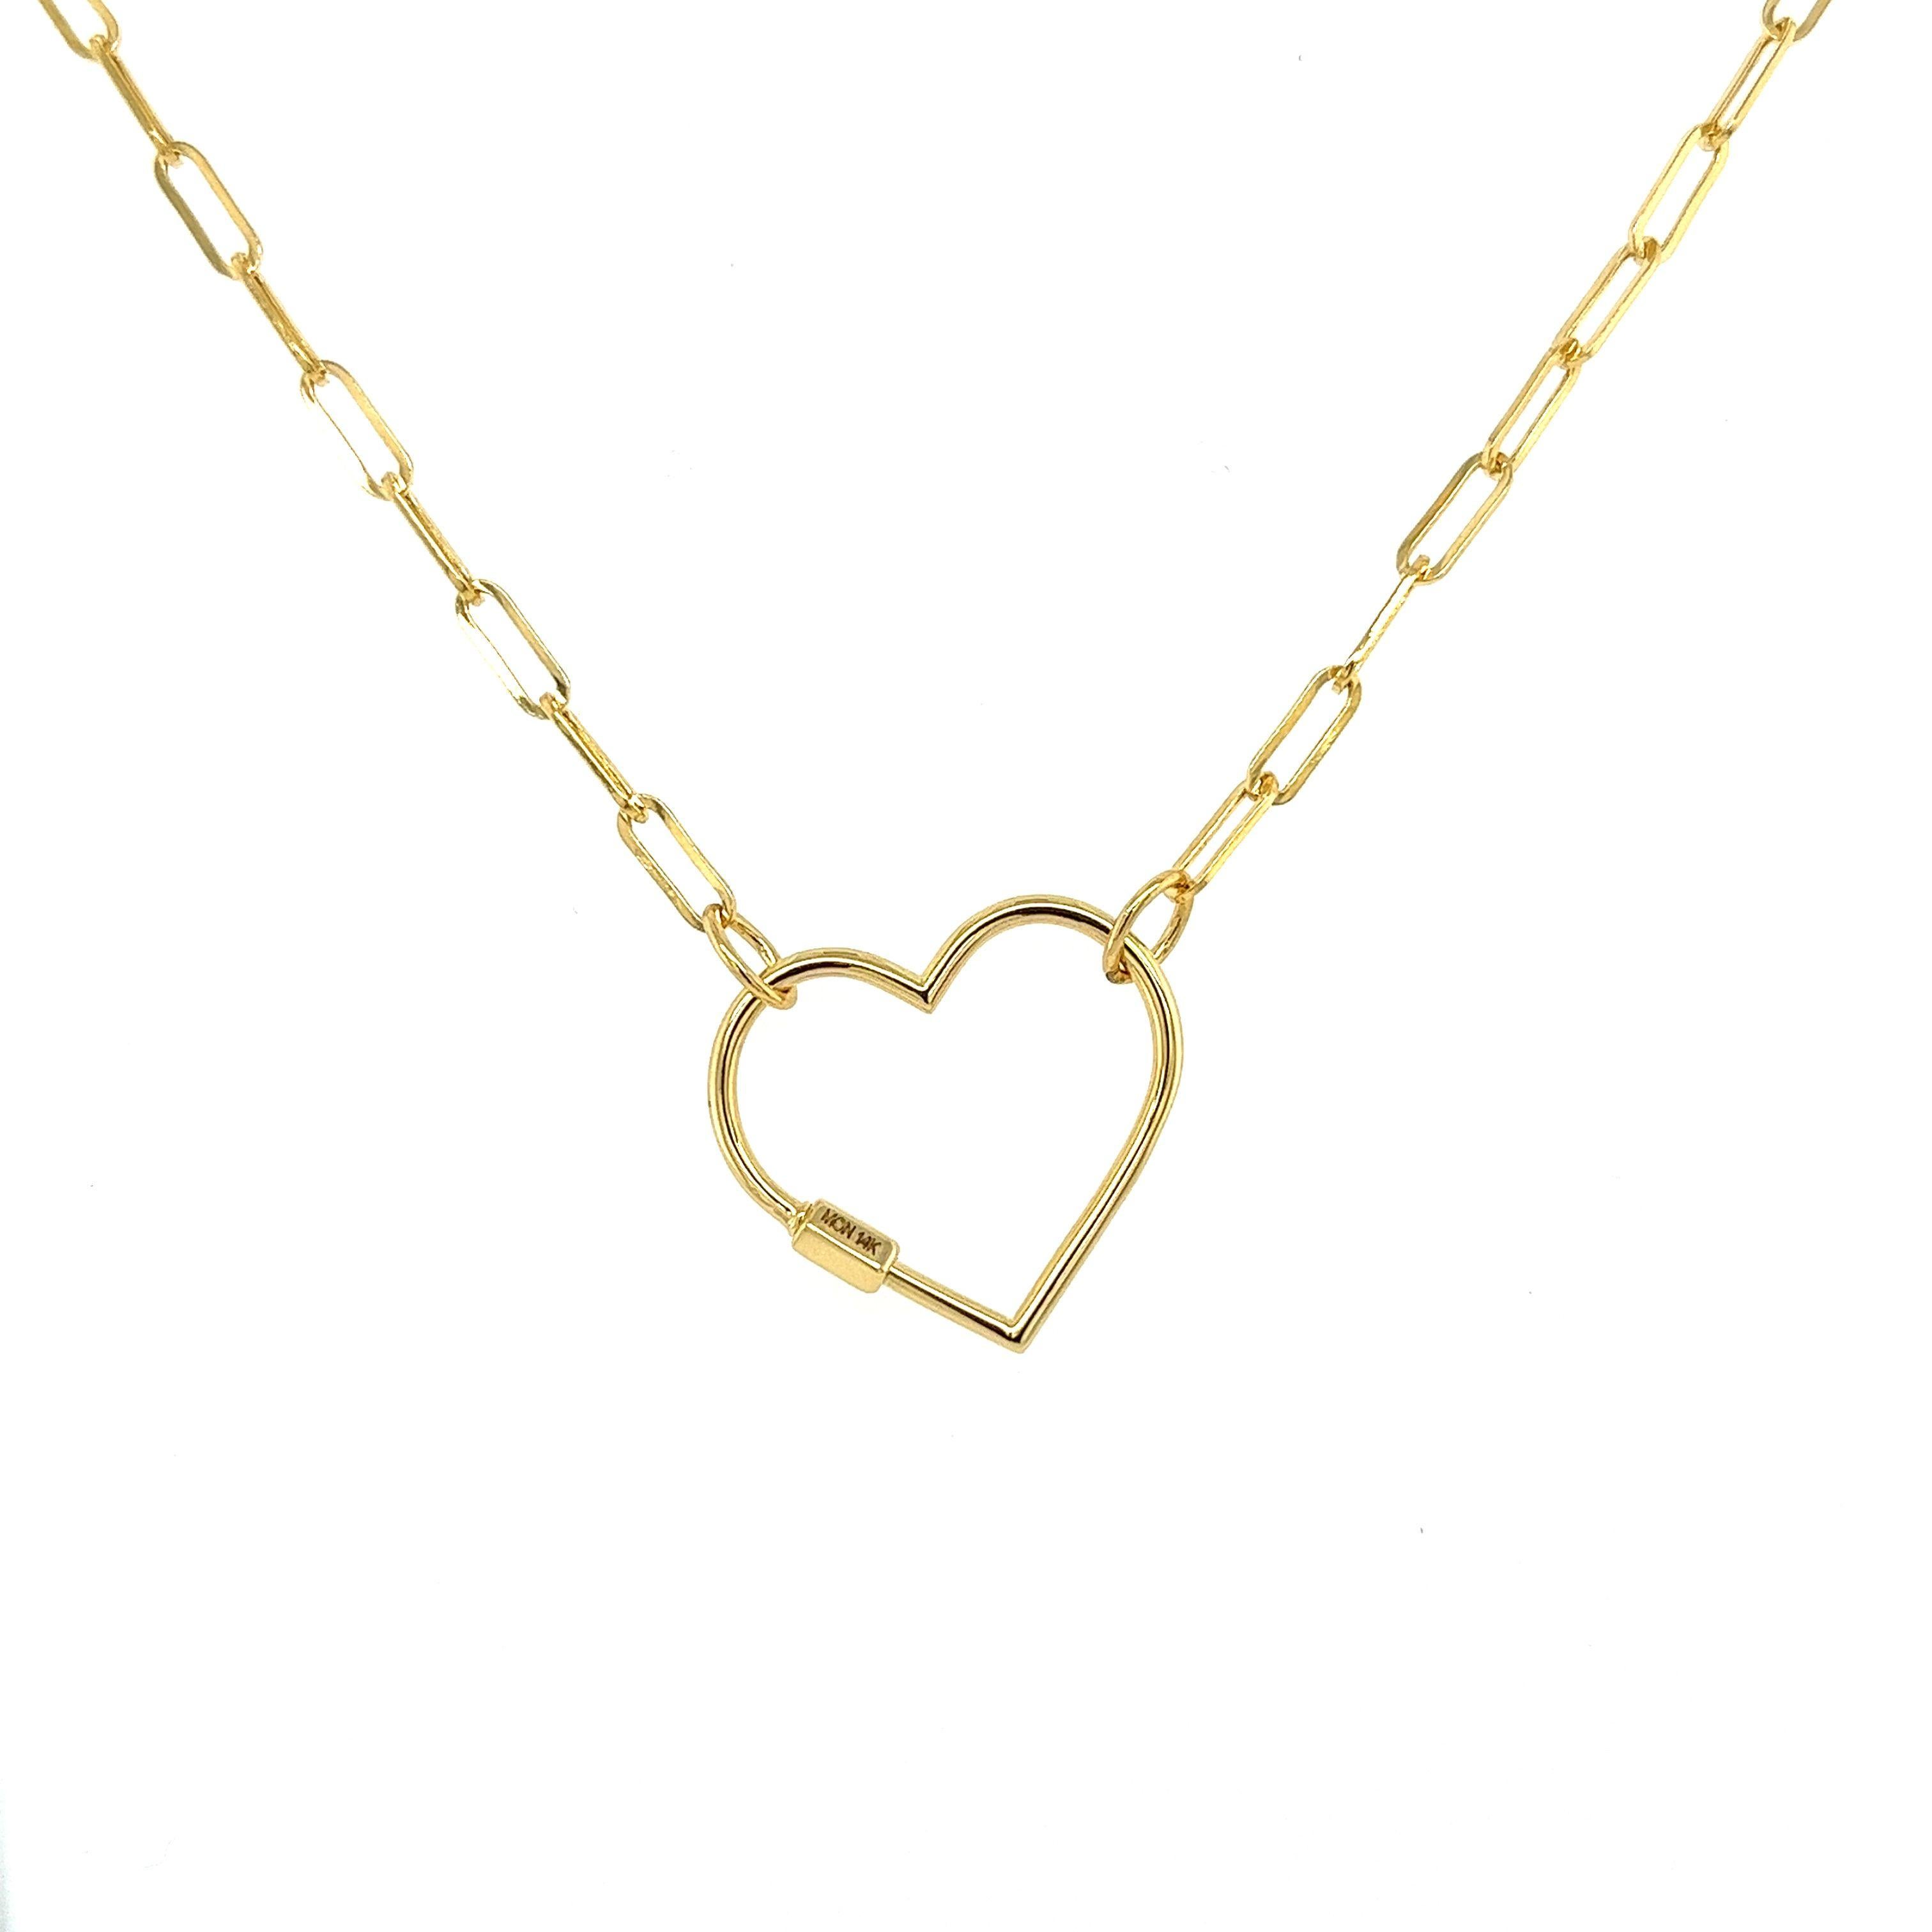 14-karat real, solid gold heart charm pendant mounted in a semi-hollow 14-karat gold paper clip chain. The chain closure lies at the heart, a symbolic and metaphoric design that opens and closes only for those who gift and receive. 

This necklace